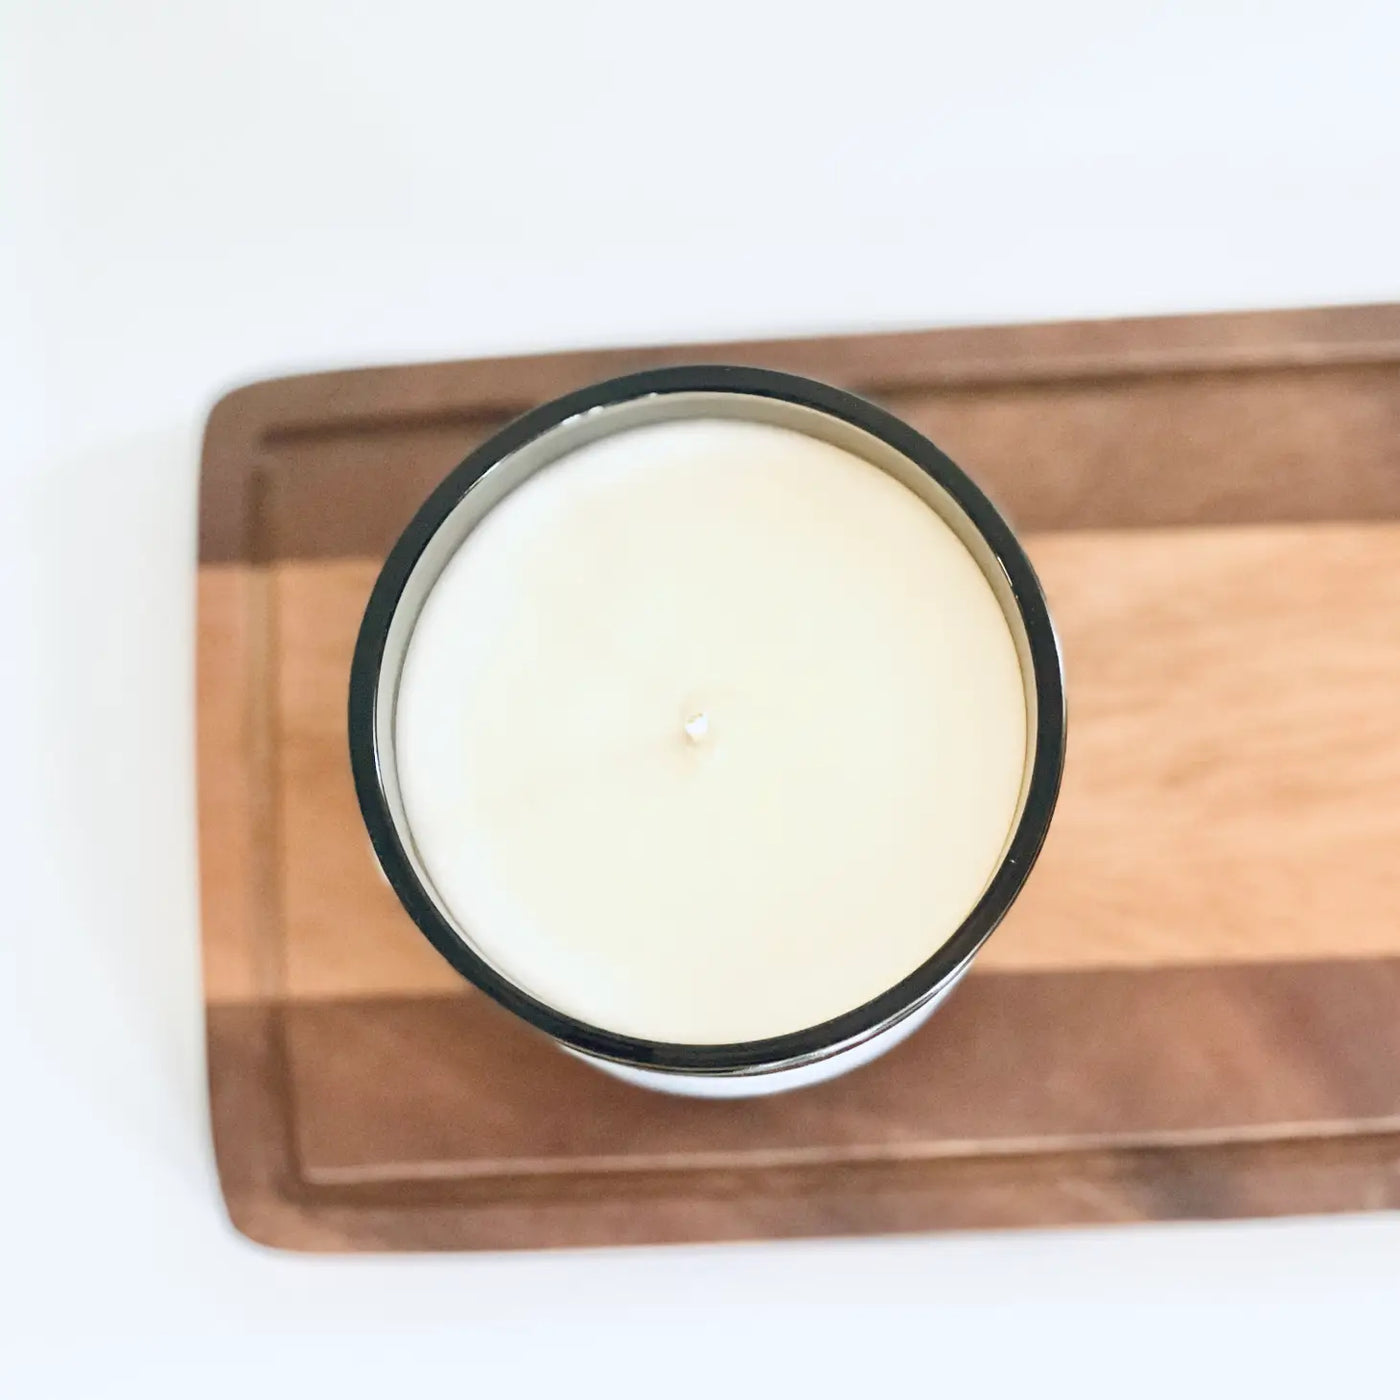 Three Wick Candle By London James